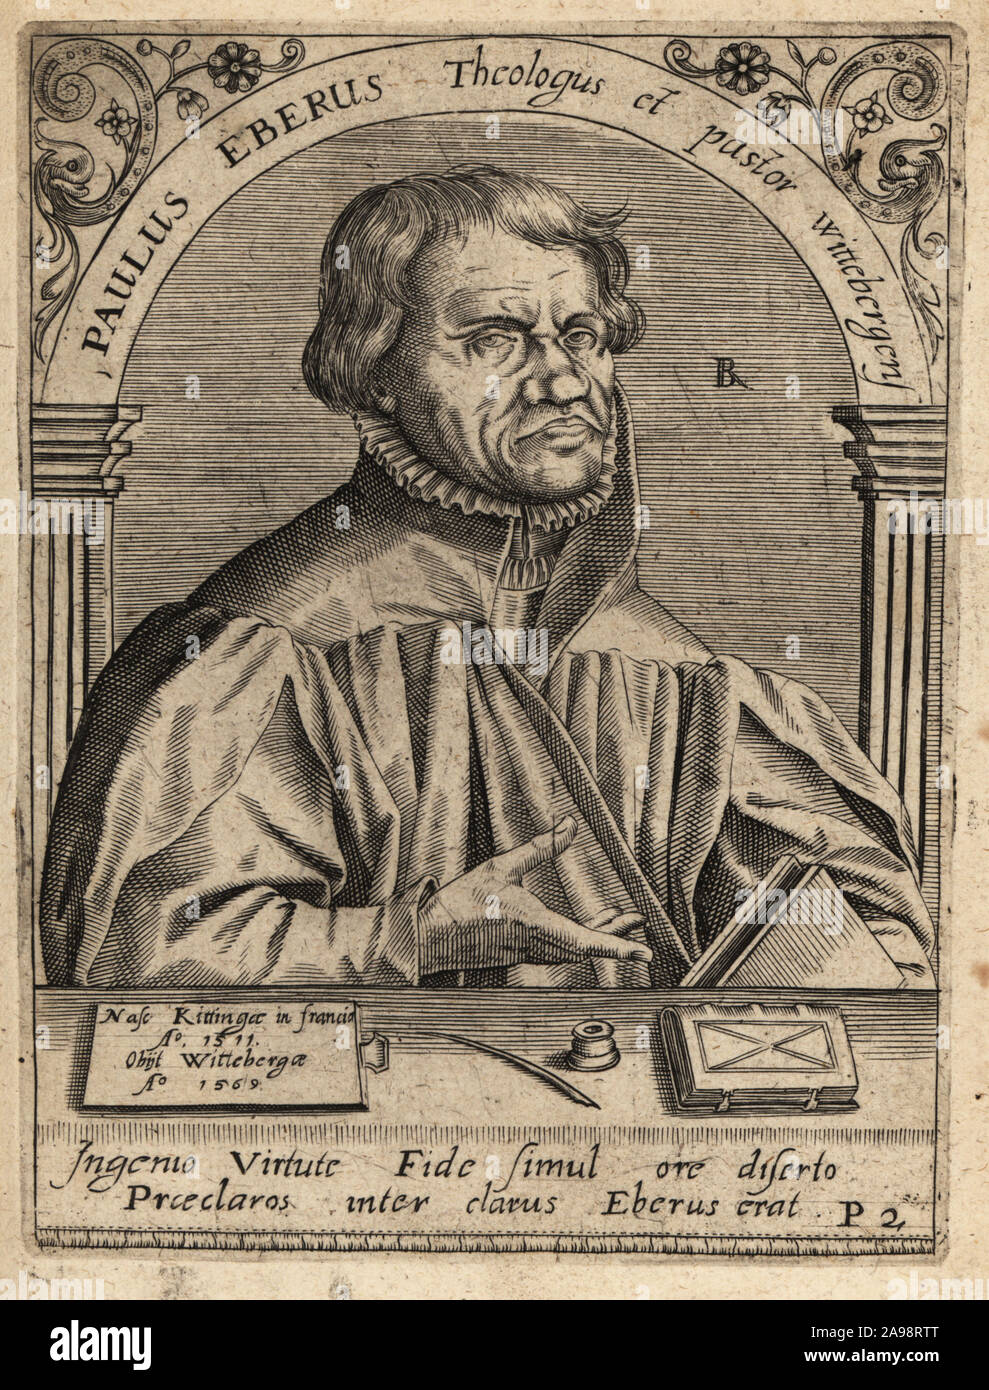 Paul Eber, 1511-1569, German Lutheran theologian, reformer and hymnwriter. Paulus Eberus Theologus et pastor wittebergensis. Copperplate engraving by Johann Theodore de Bry from Jean-Jacques Boissard’s Bibliotheca Chalcographica, Johann Ammonius, Frankfurt, 1650. Stock Photo